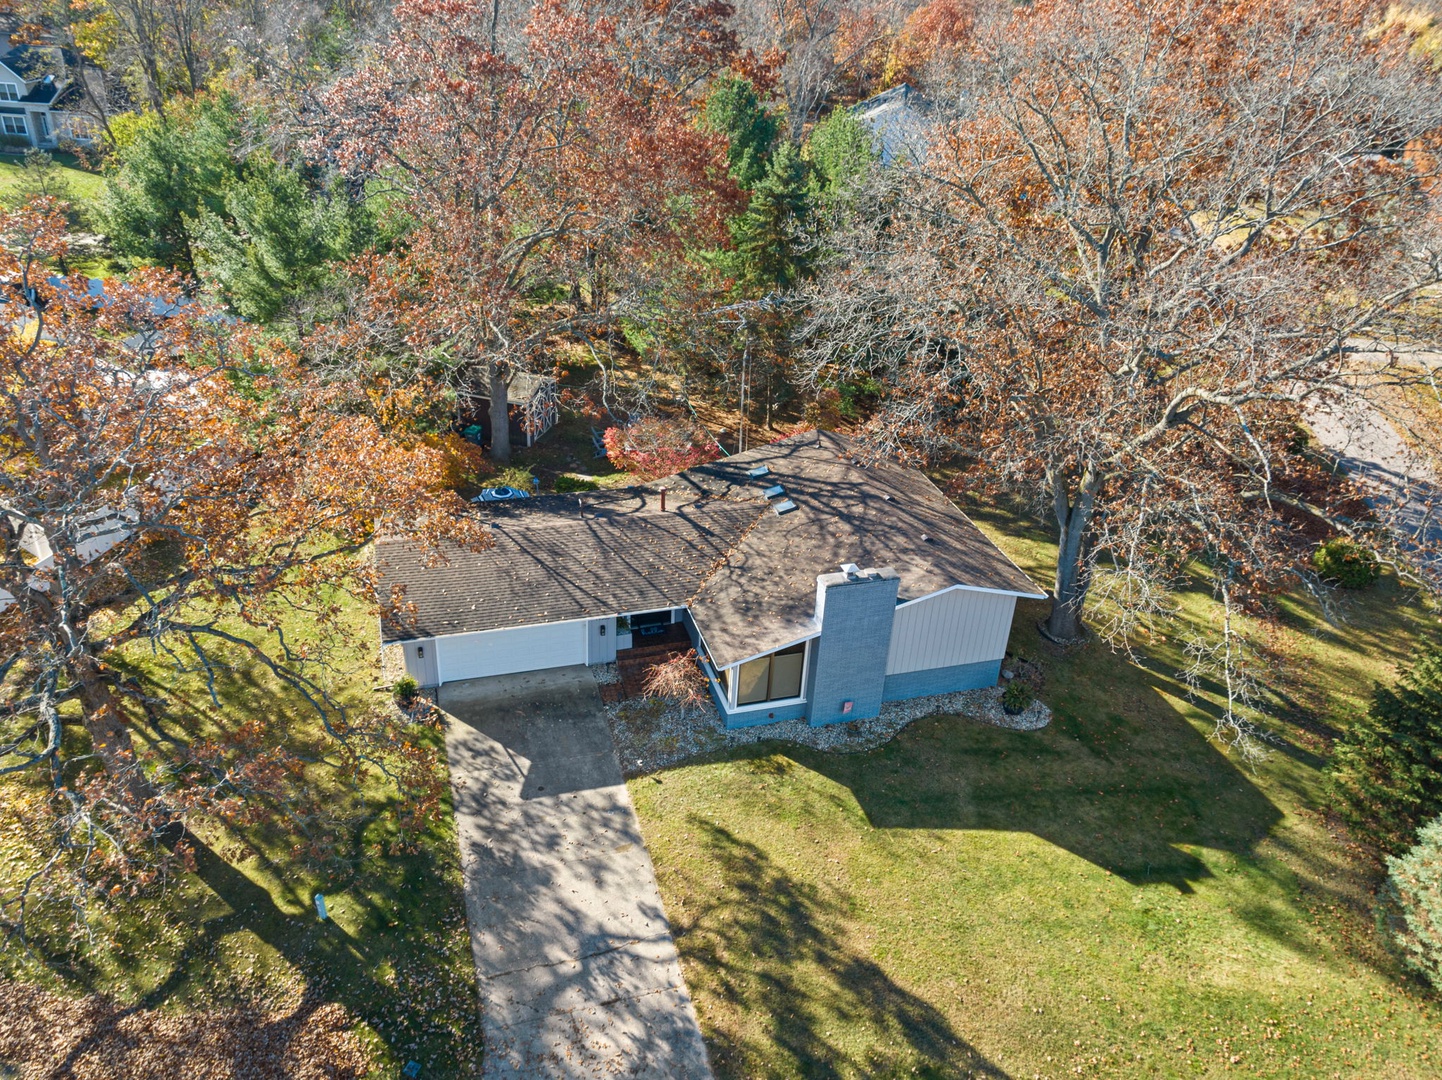 A bird’s eye view of the house and yard.